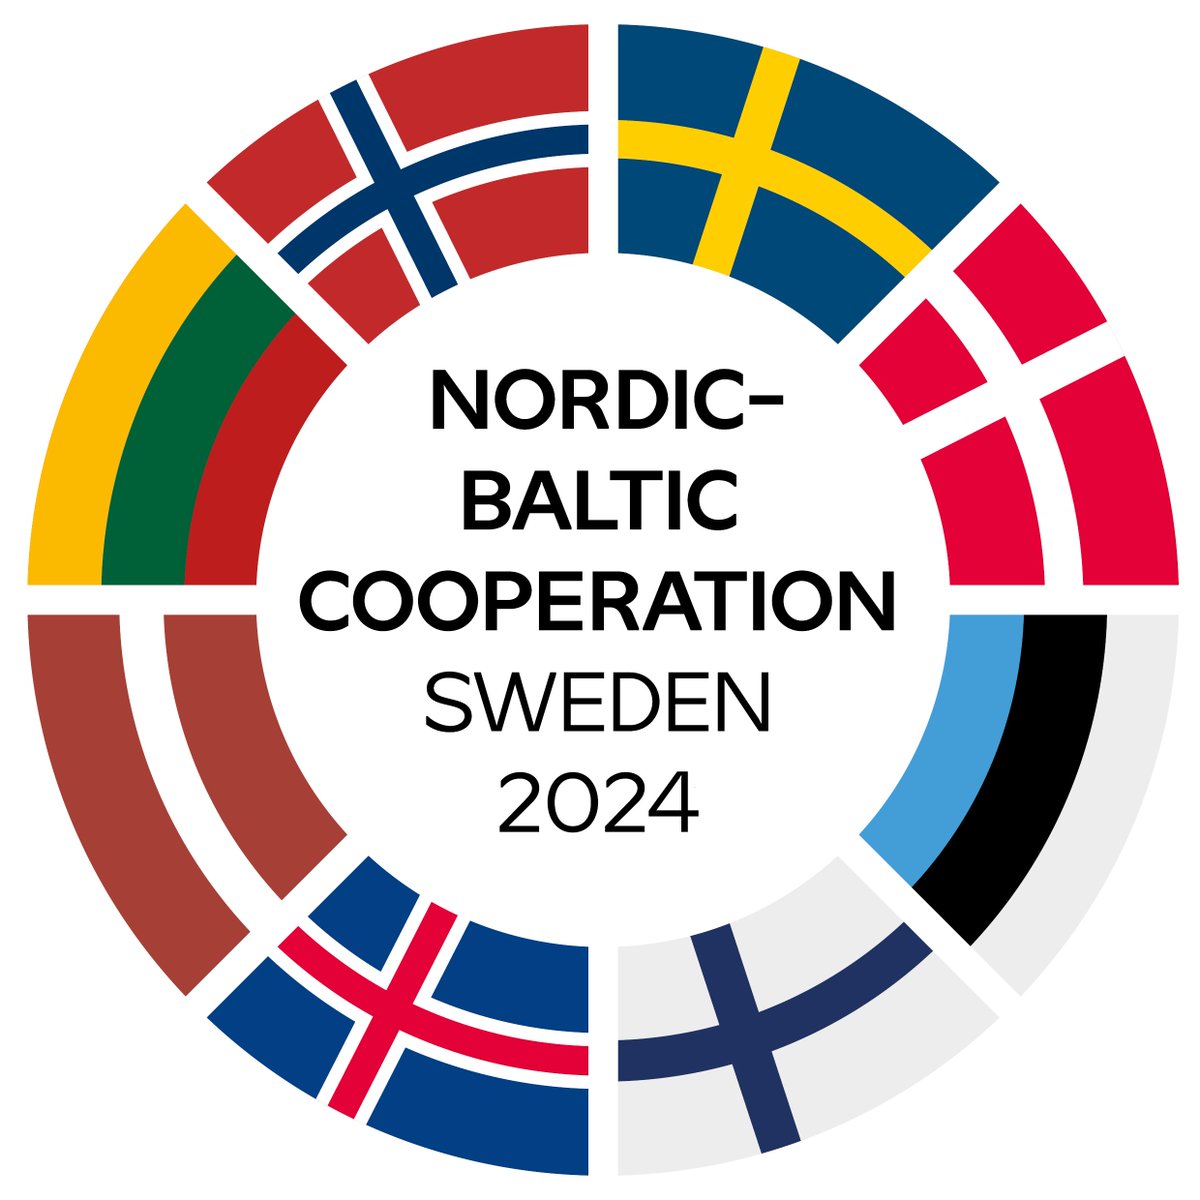 Today @TobiasBillstrom is meeting with Nordic-Baltic peers on Gotland. Focus on regional foreign and security policy issues, particularly continued support to 🇺🇦. Nordic-Baltic cooperation is more important than ever in a time of geopolitical challenges. #NordicBalticCooperation